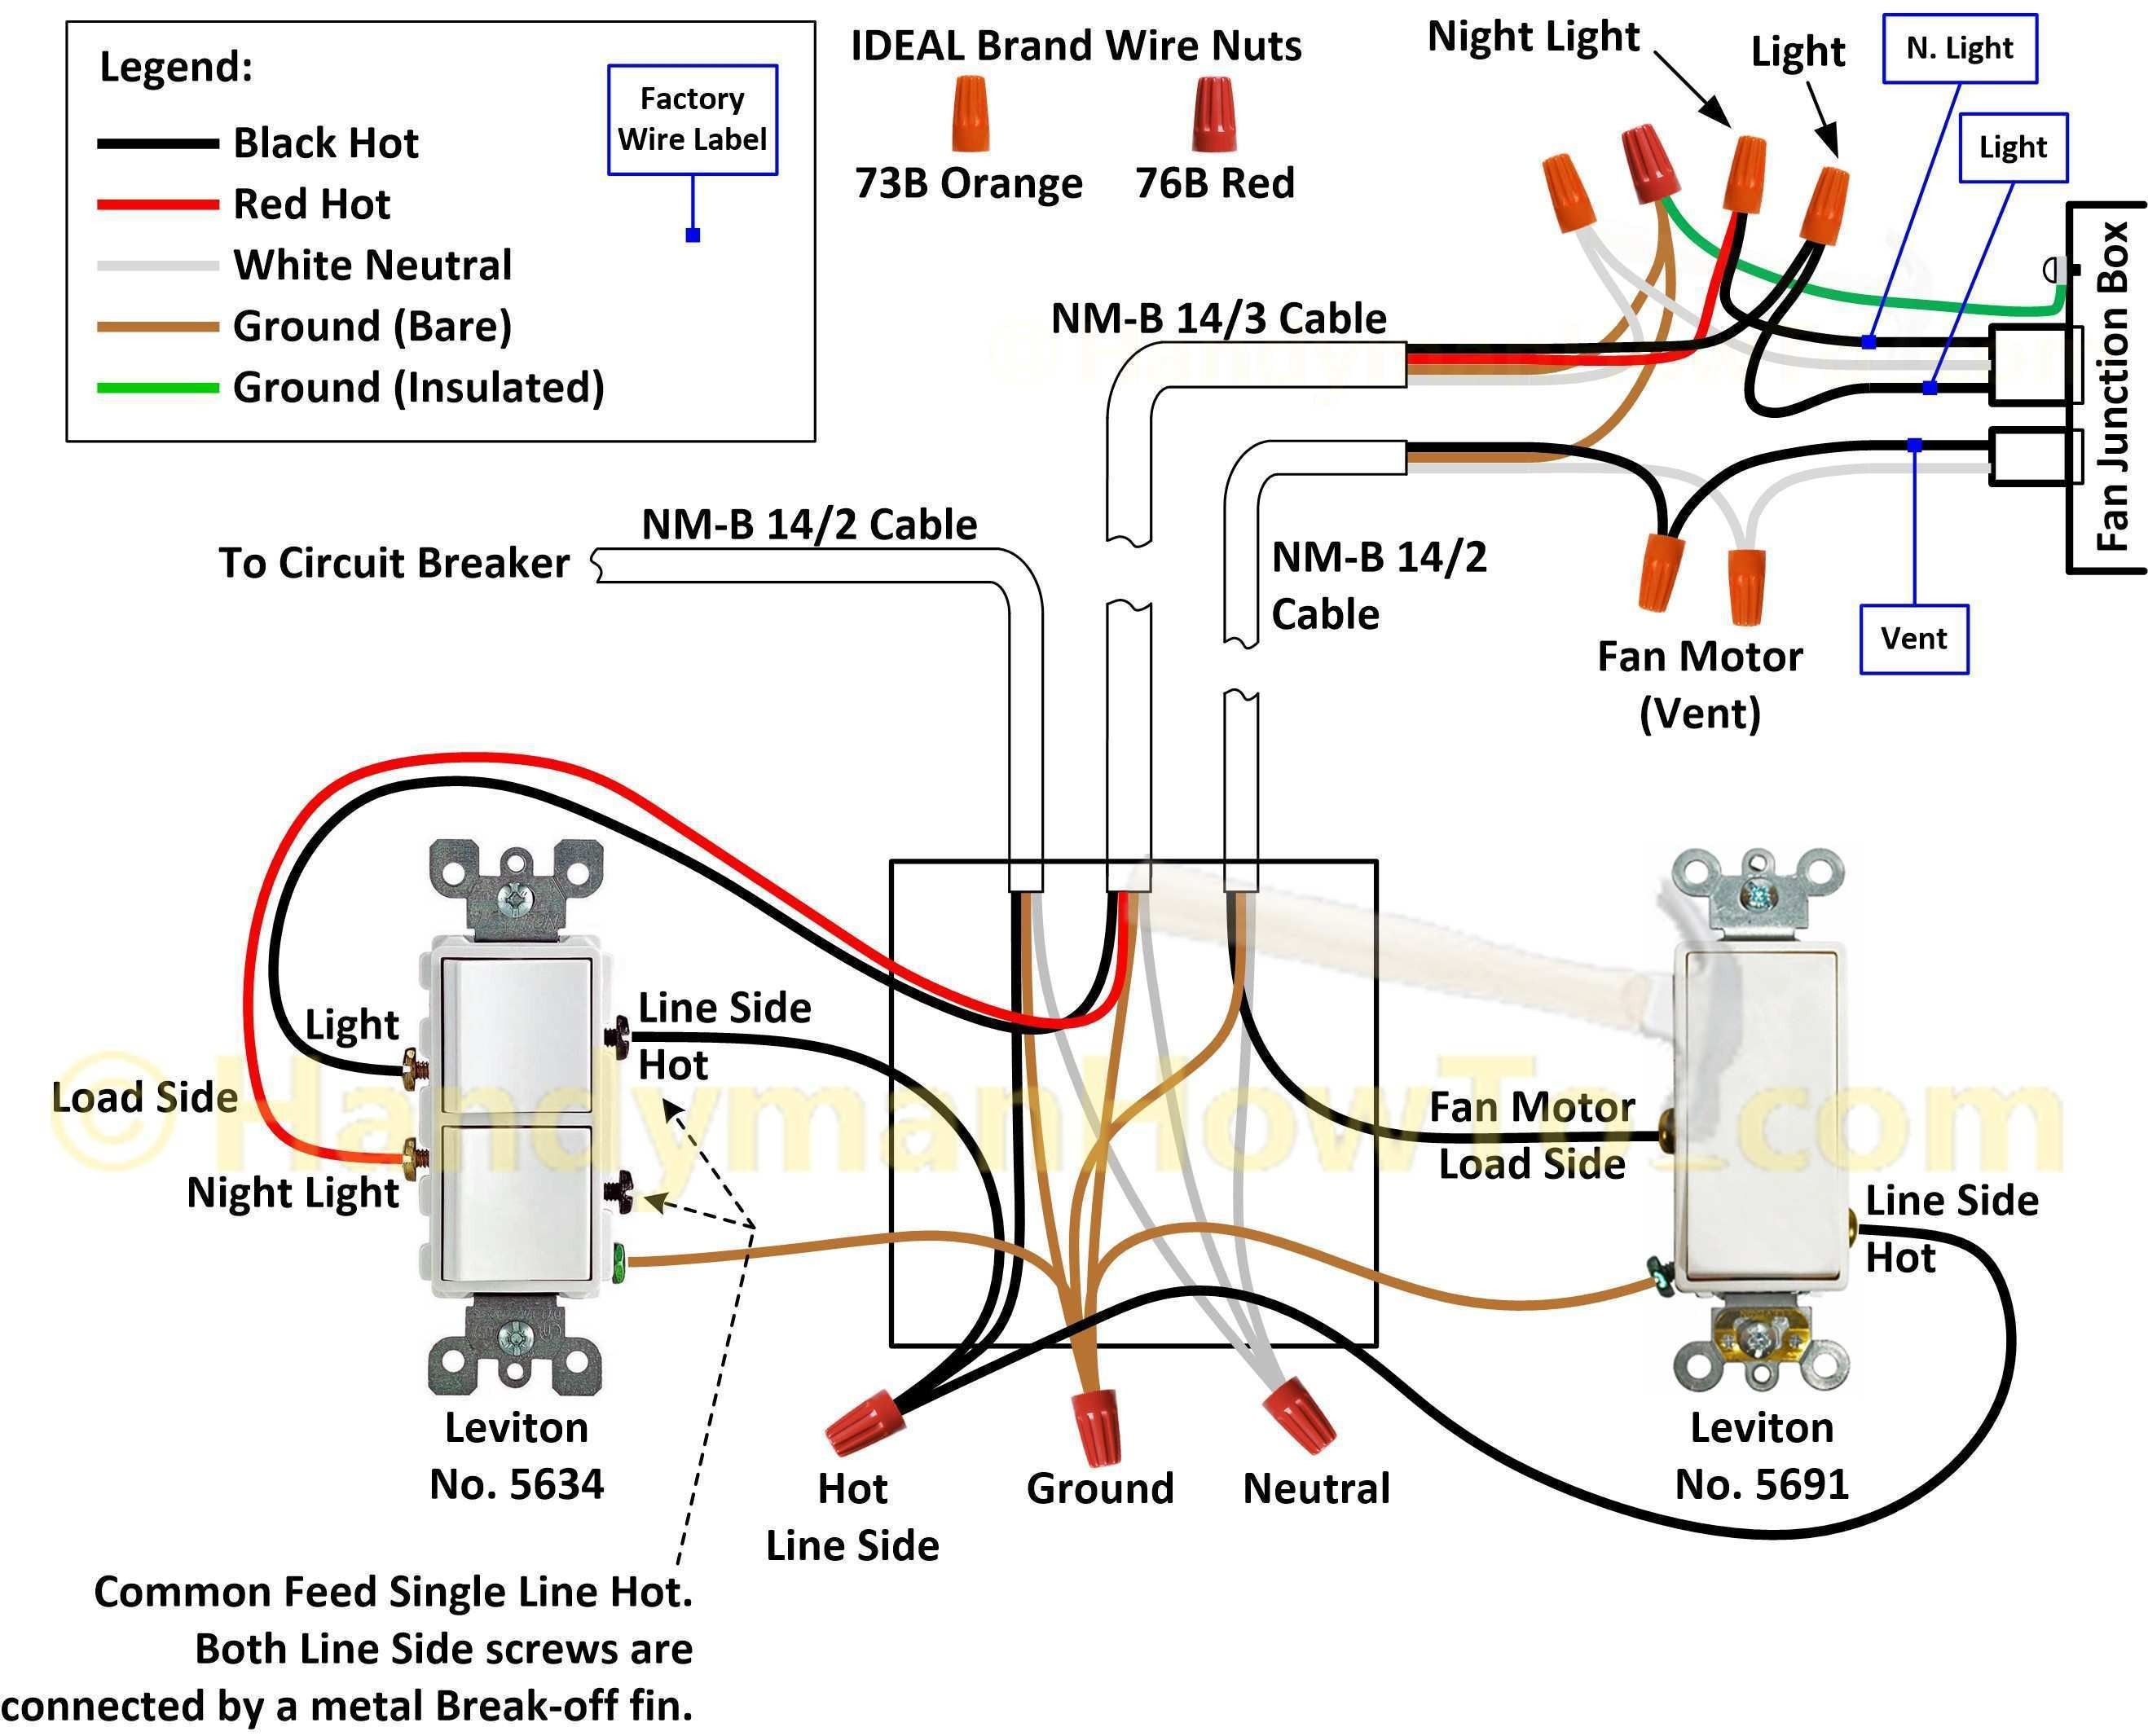 Wiring Diagram whole House Fan Refrence Wiring Diagram for whole House Fan New Ceiling Fan Wiring